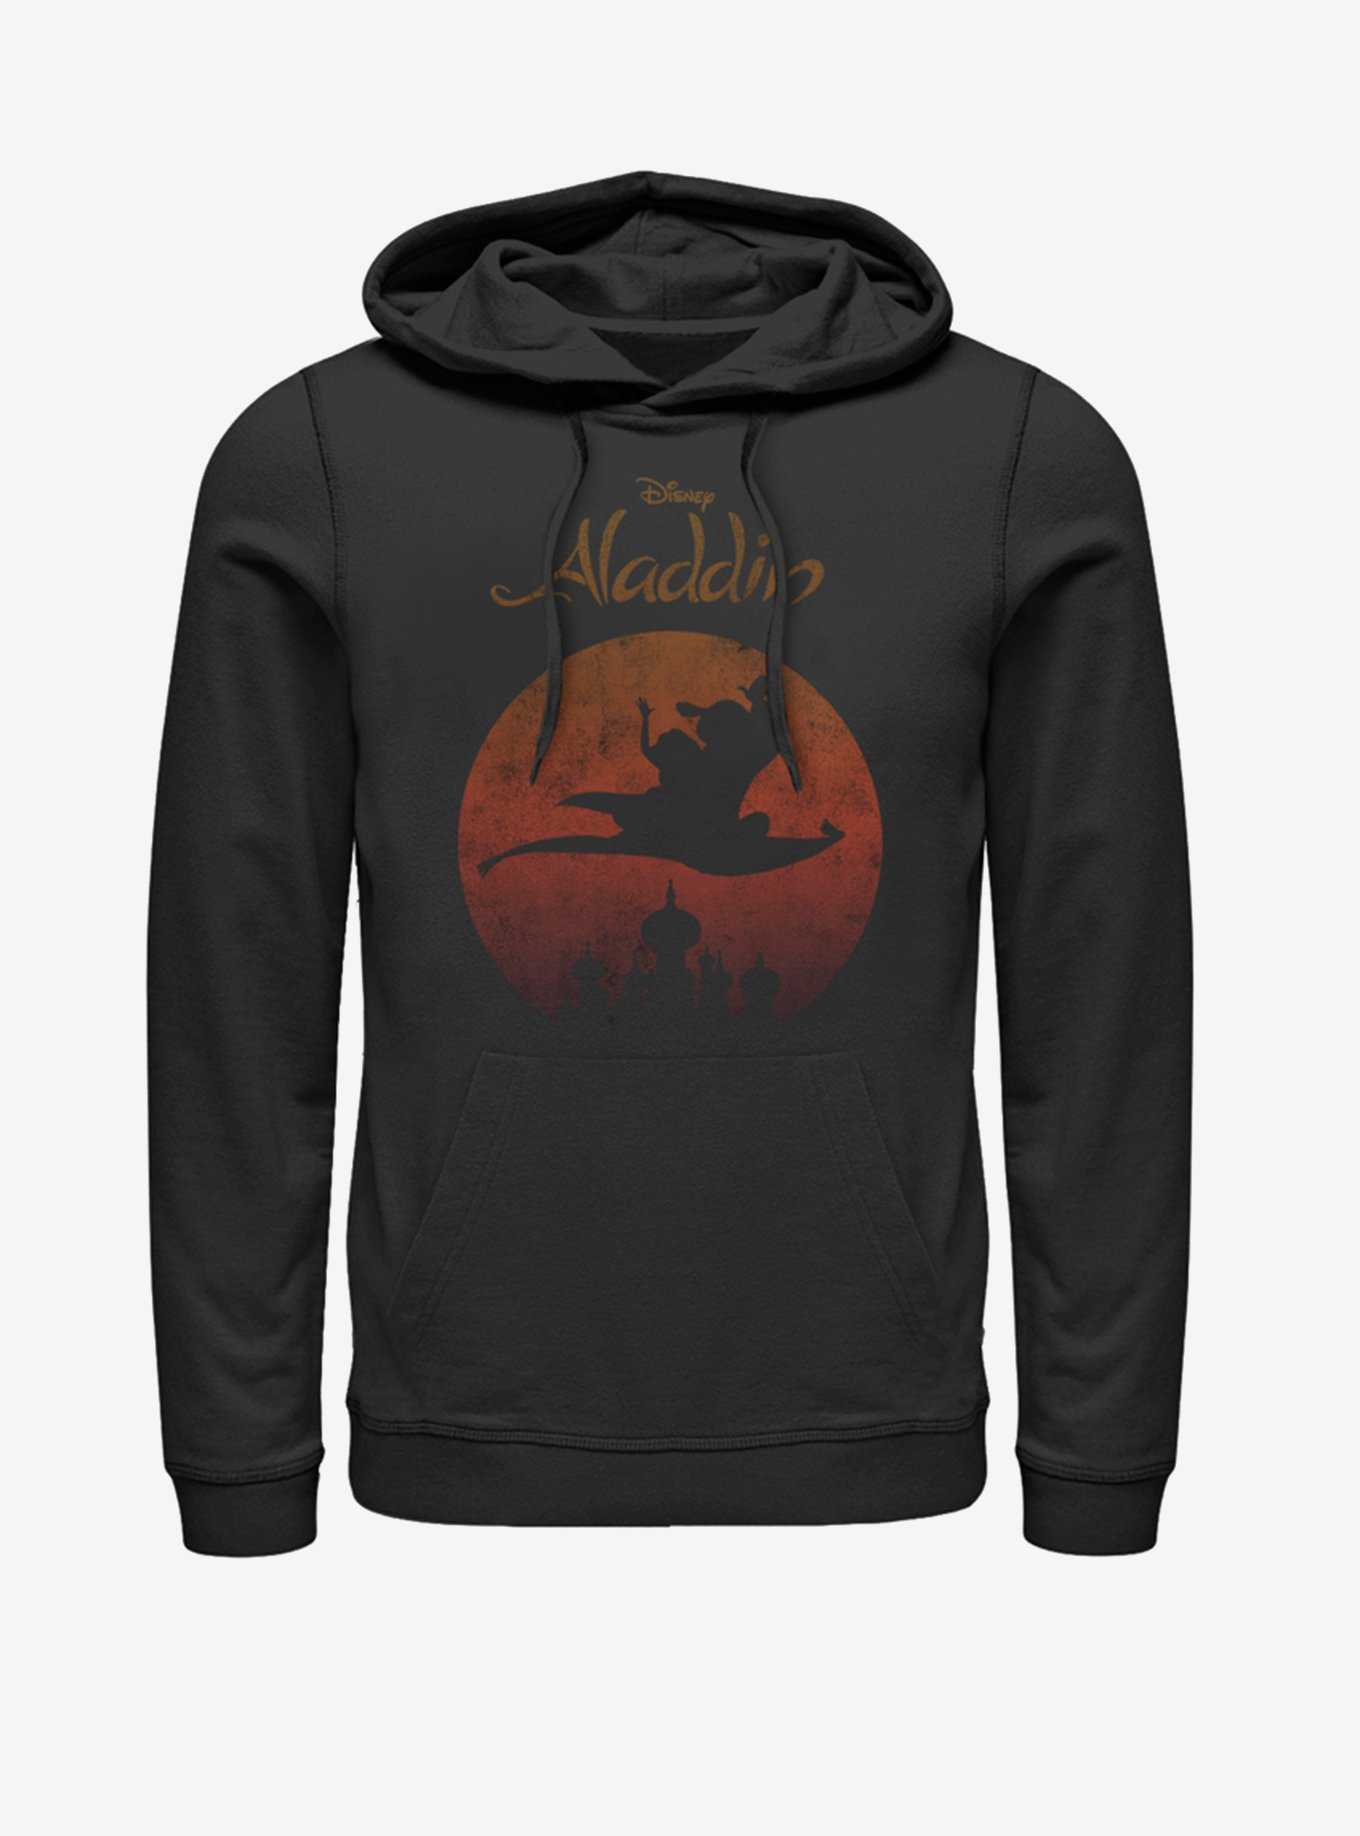 OFFICIAL Aladdin Hoodies & Sweaters